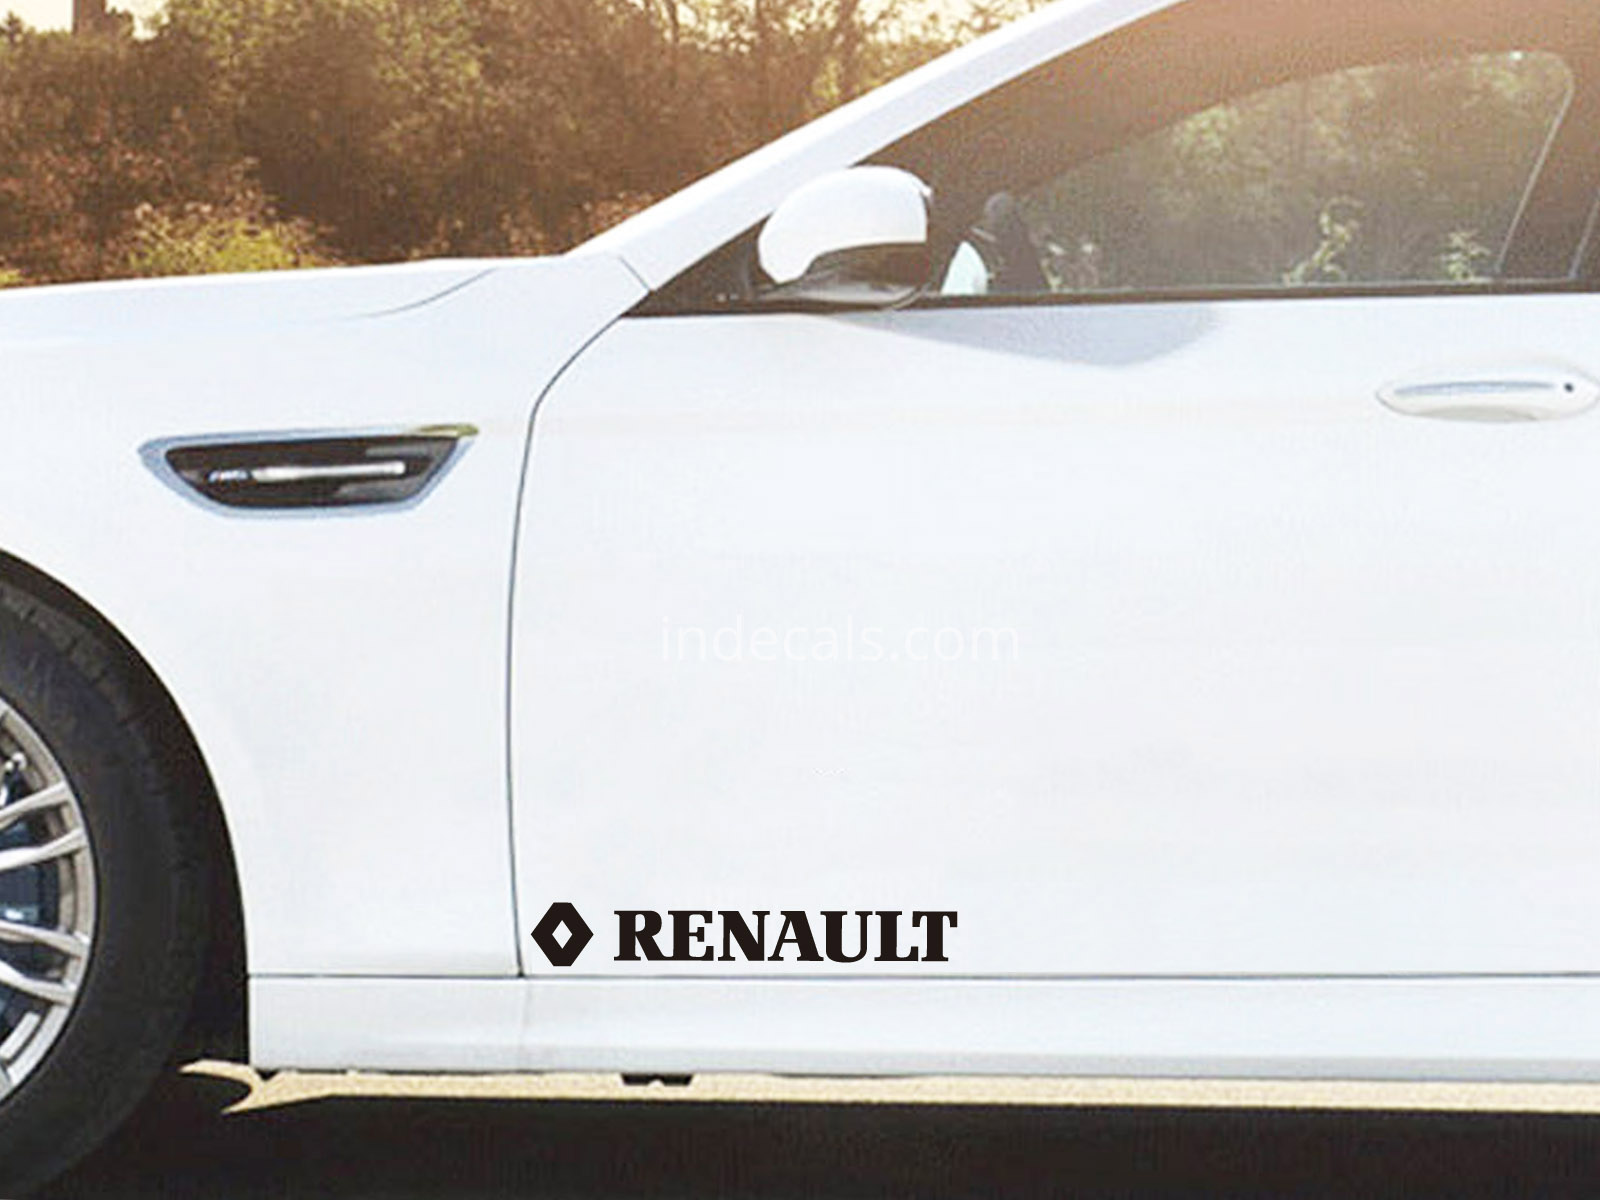 2 x Renault Stickers for Doors Large - Black